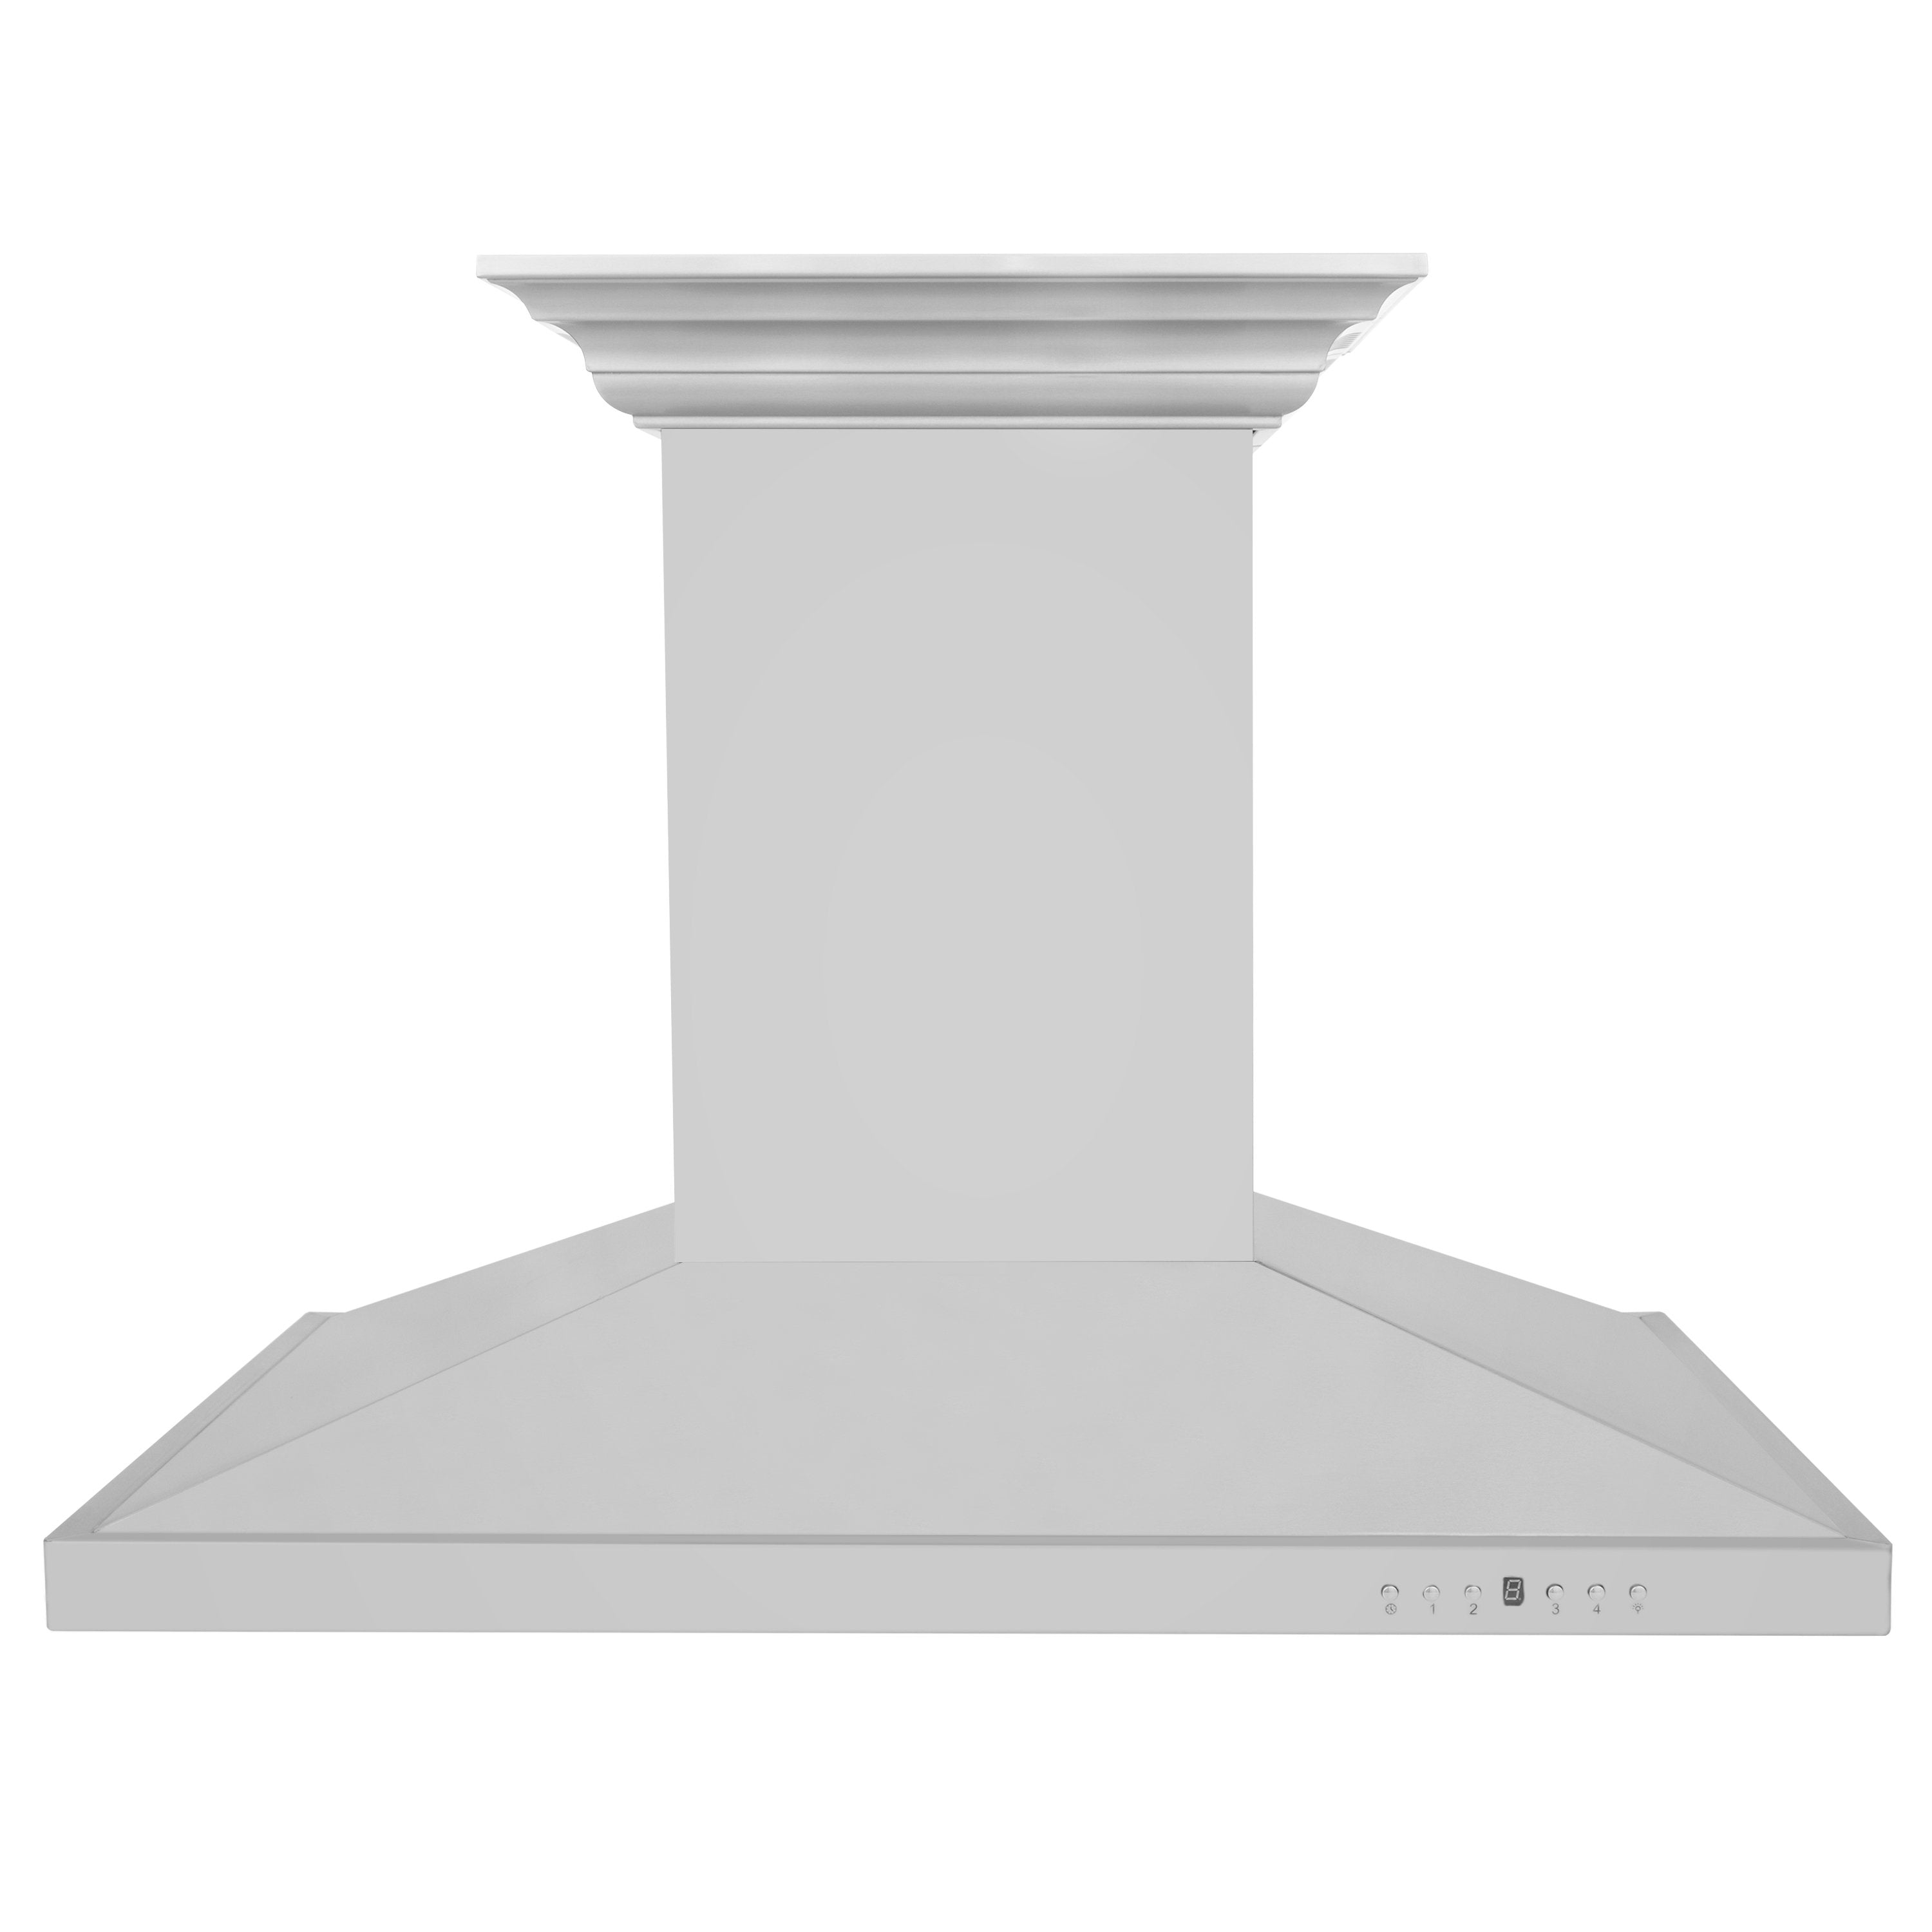 48" ZLINE CrownSound‚ Ducted Vent Island Mount Range Hood in Stainless Steel with Built-in Bluetooth Speakers (GL2iCRN-BT-48)